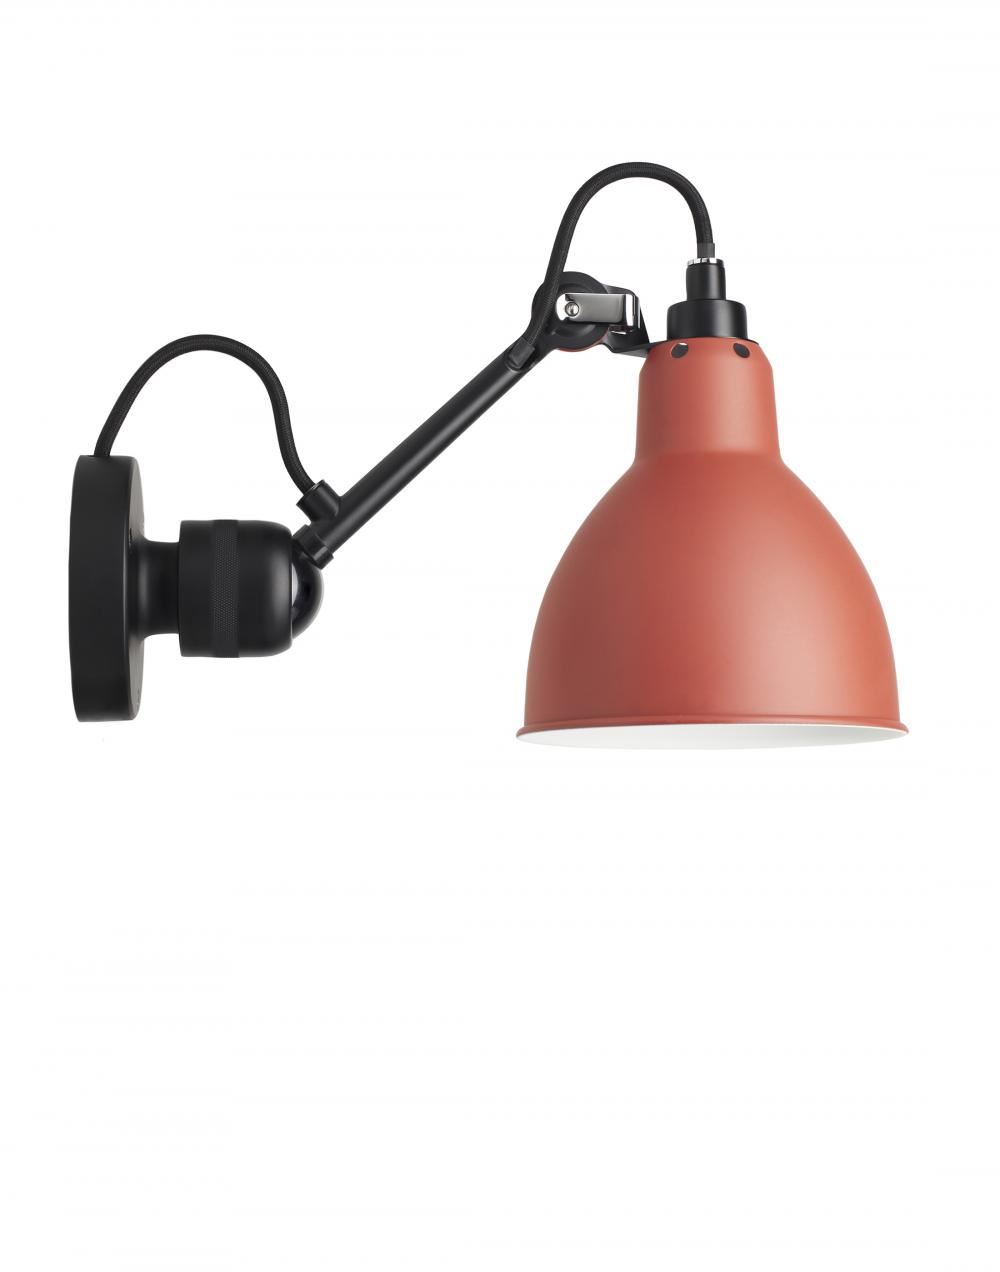 Lampe Gras 304 Small Wall Light Black Arm Red Shade Round Hardwired